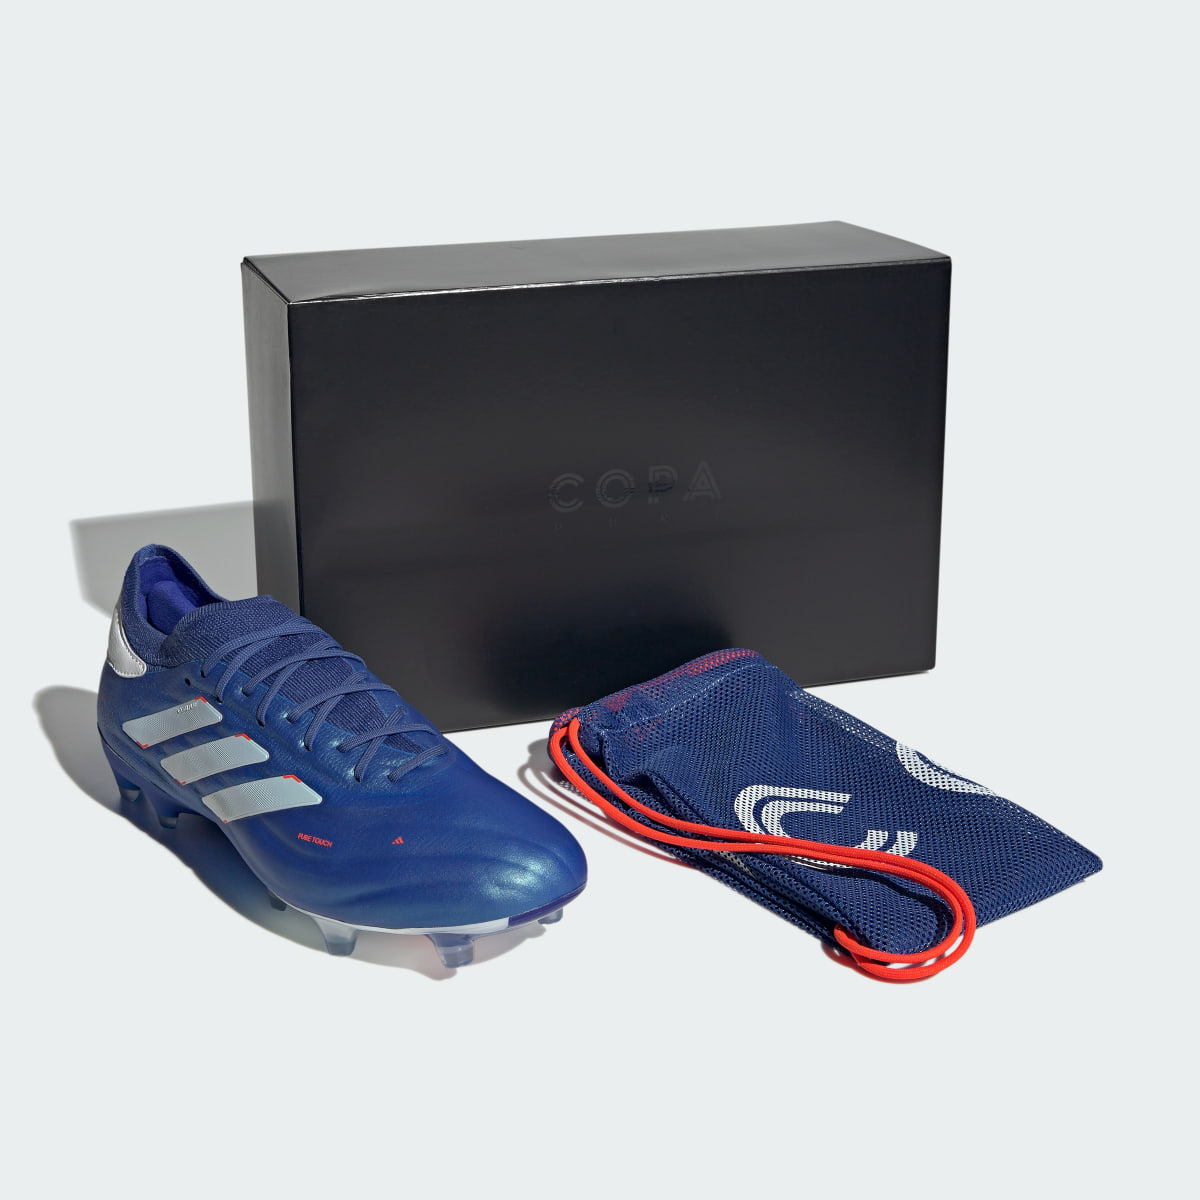 Adidas Copa Pure II+ Firm Ground Boots. 13